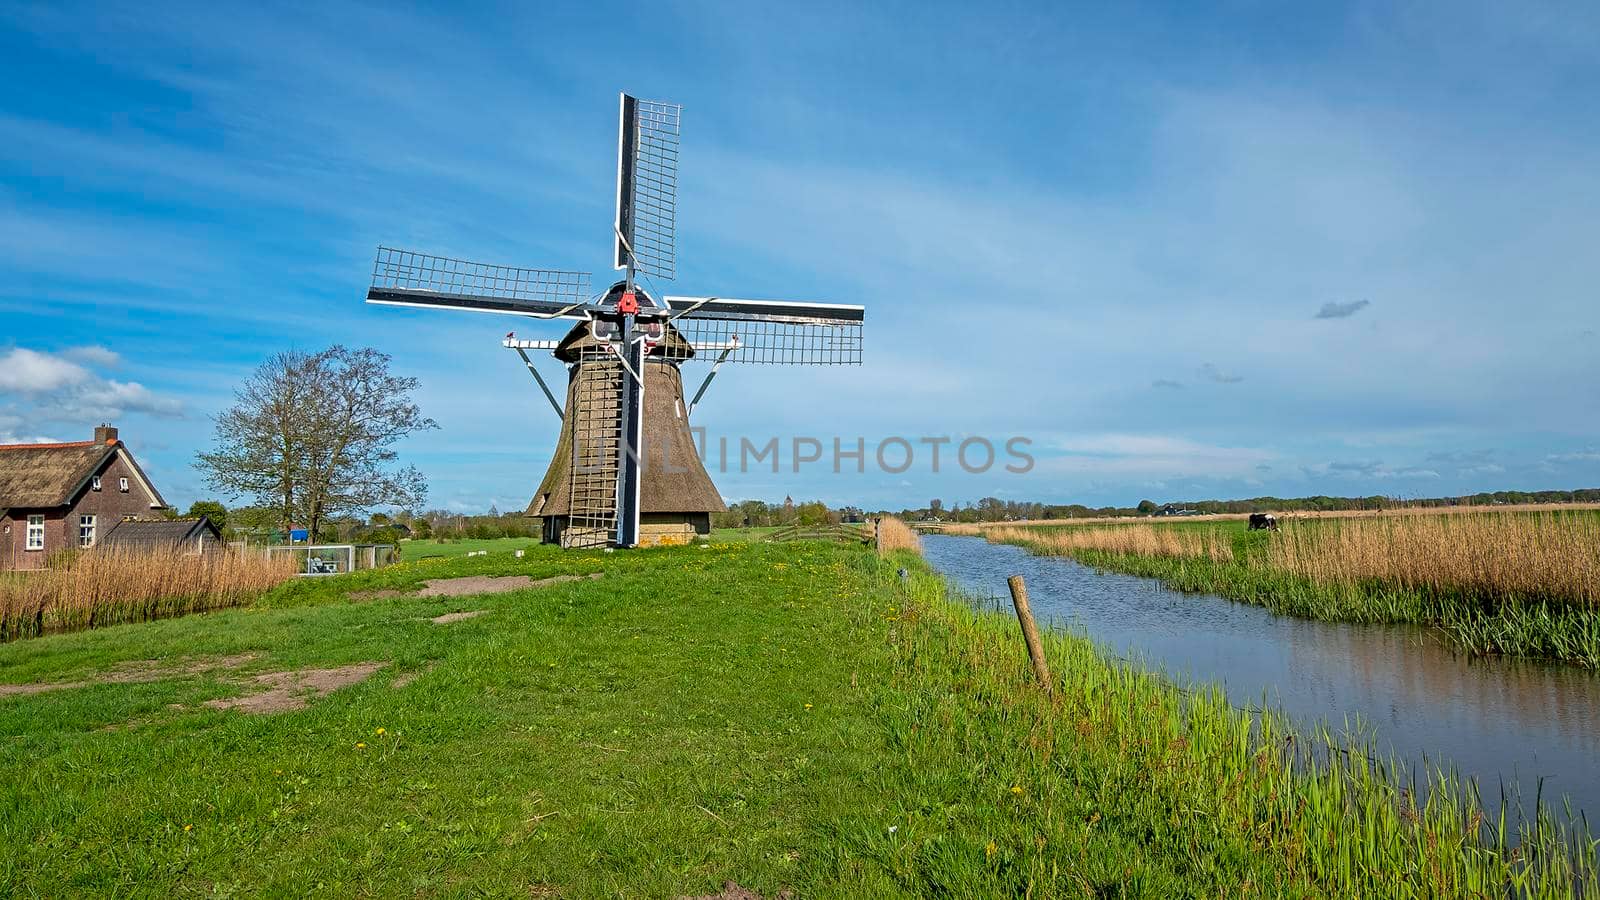 Oudkerker windmill in the countryside from the Netherlands